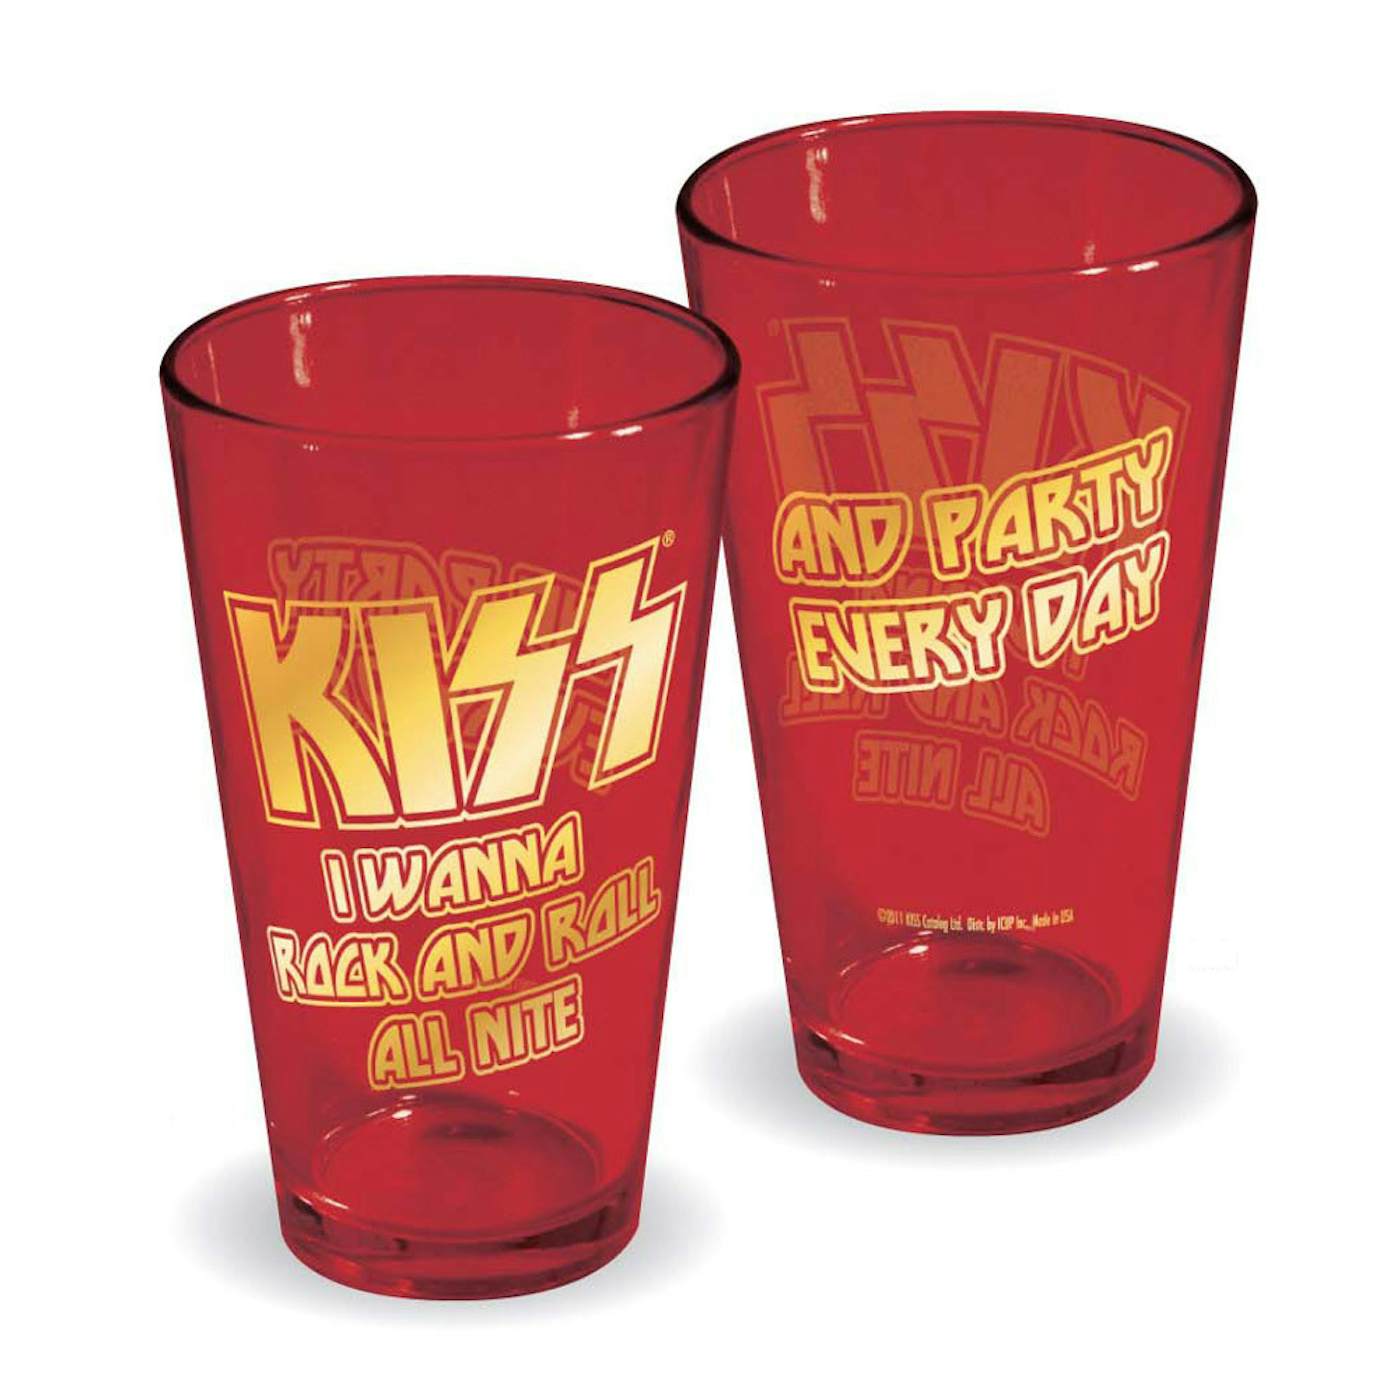 KISS Rock And Roll All Nite Pint Glass